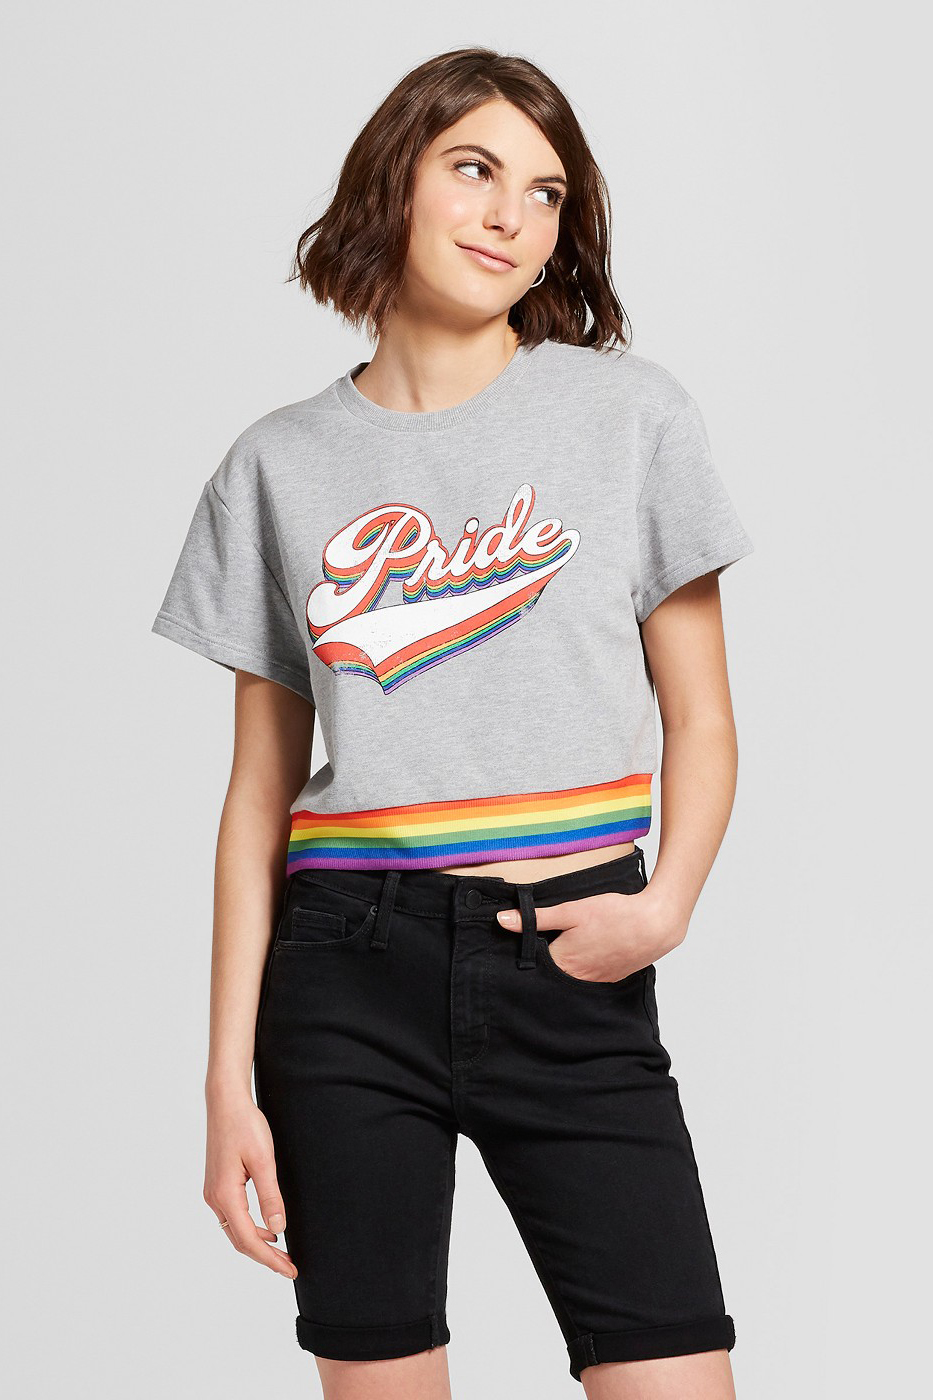 target pride collection